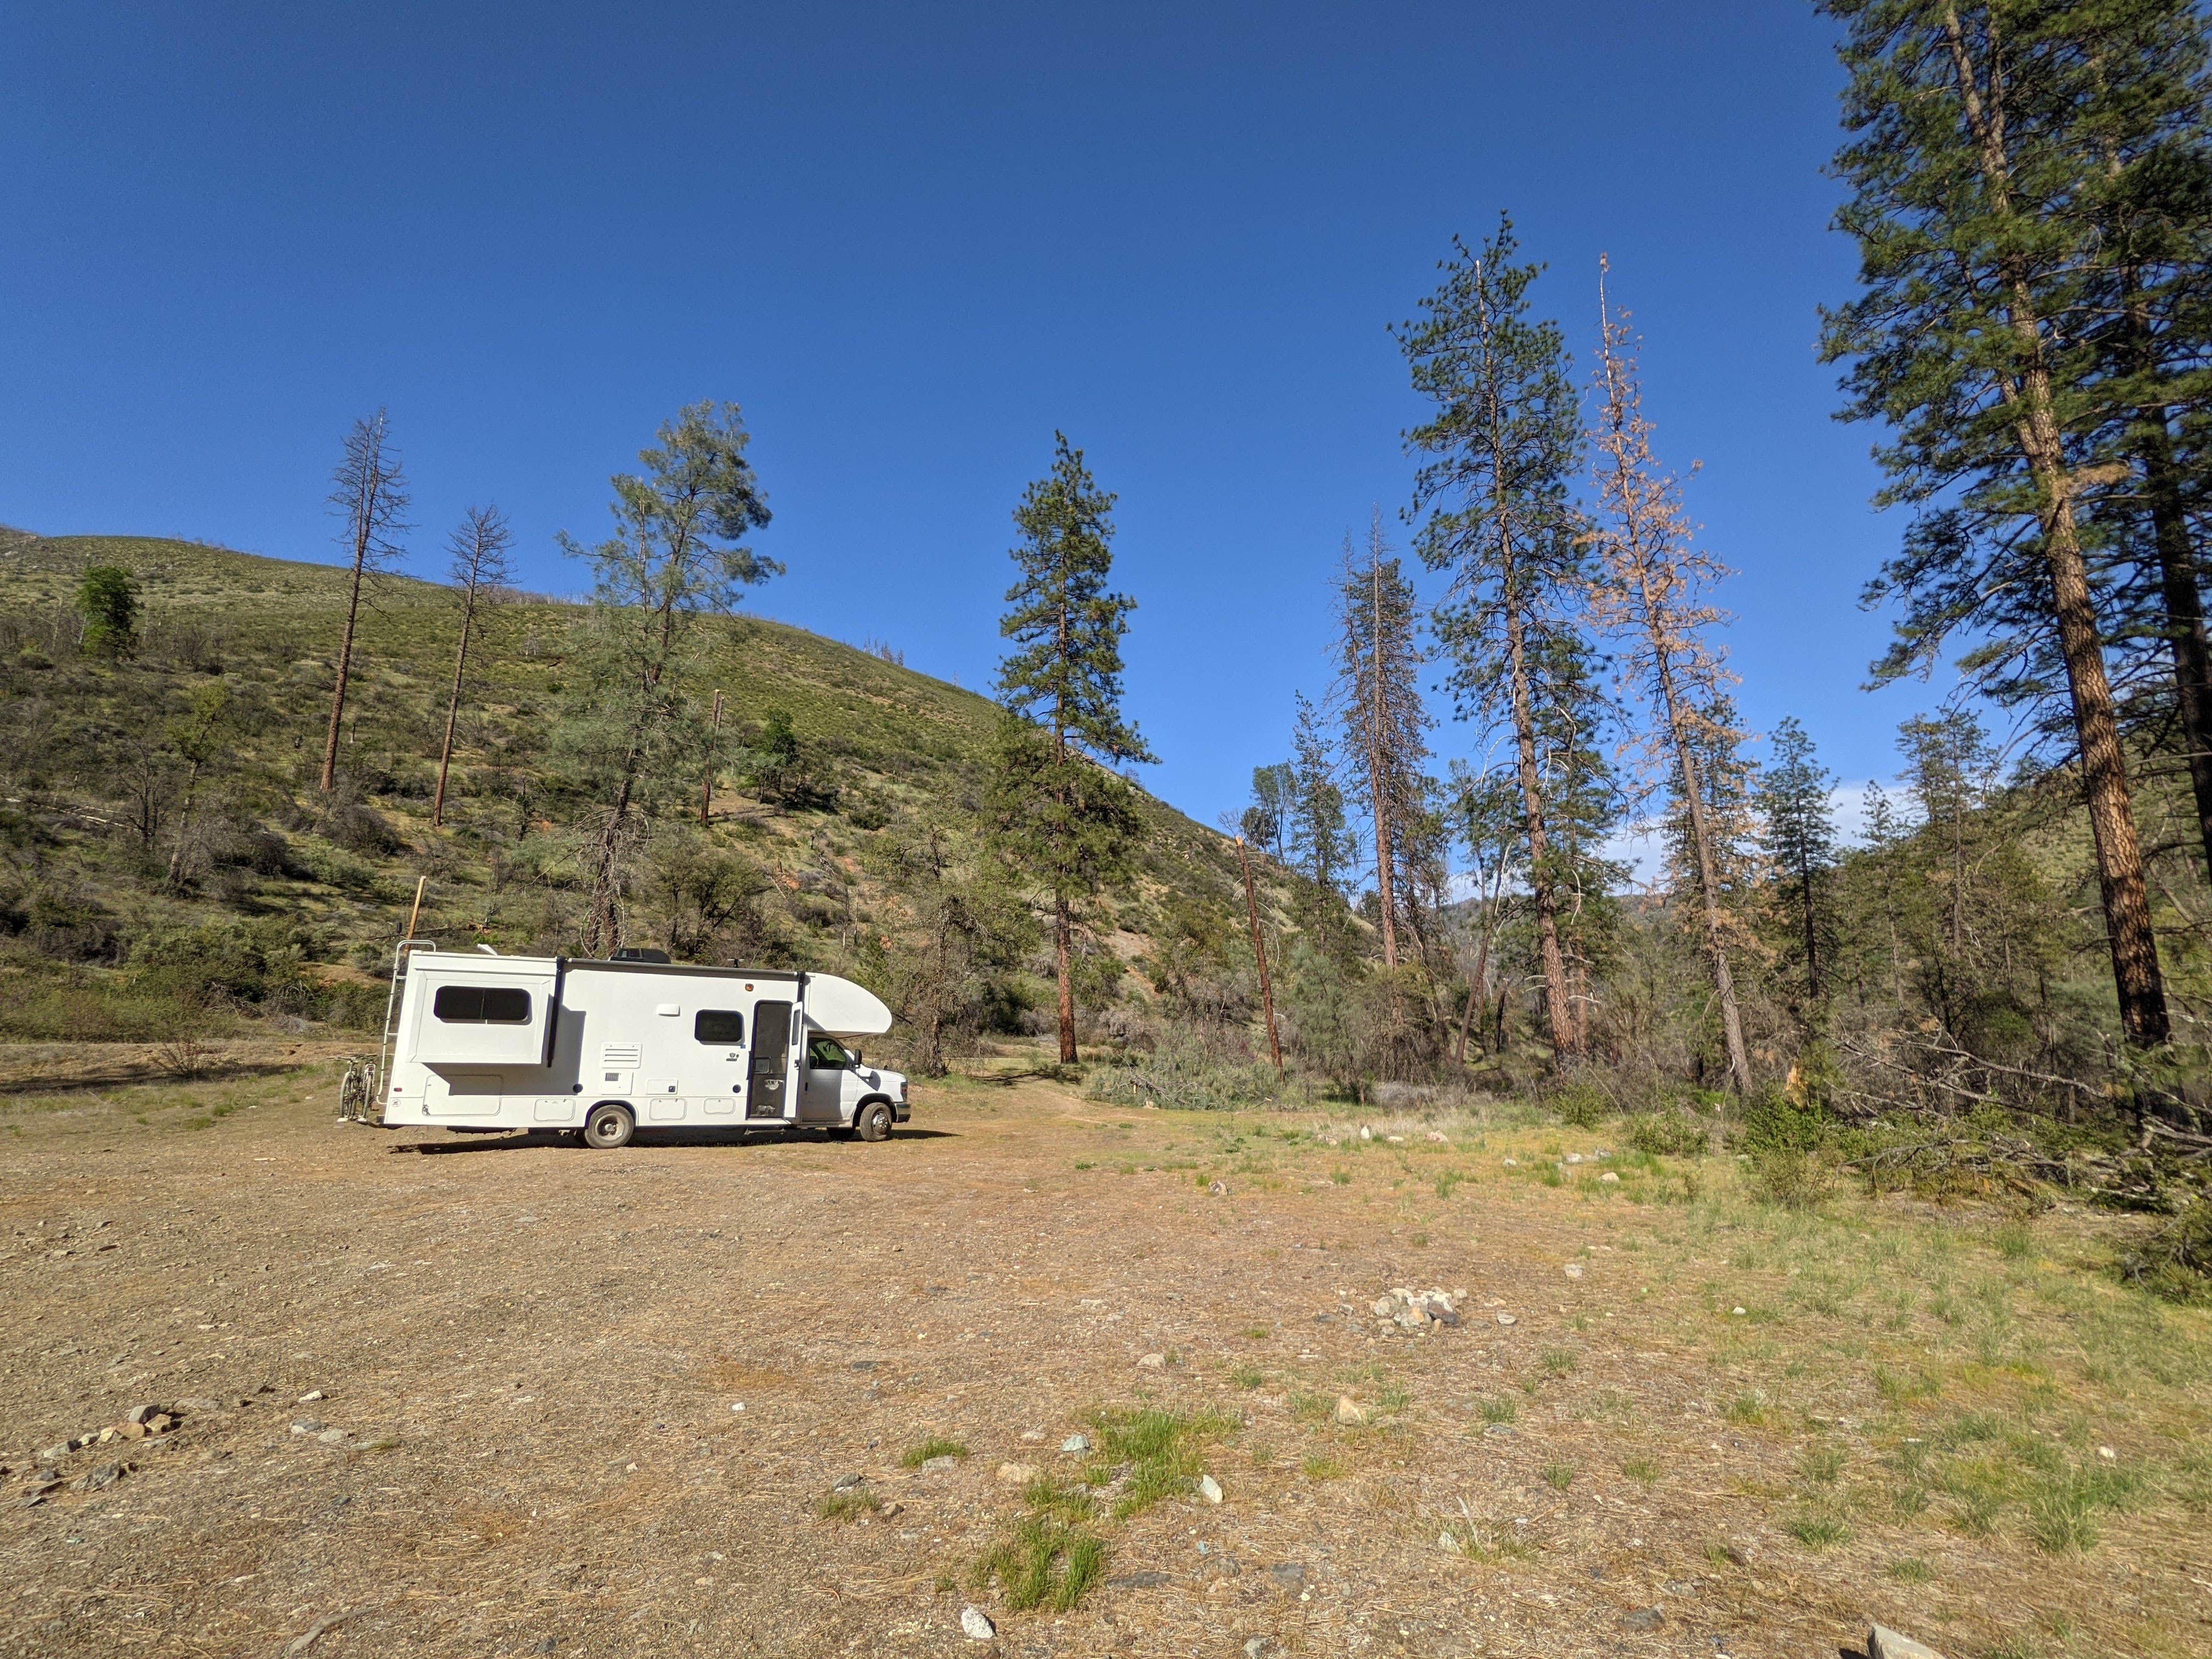 Camper submitted image from Cline Gulch BLM Dispersed - 5